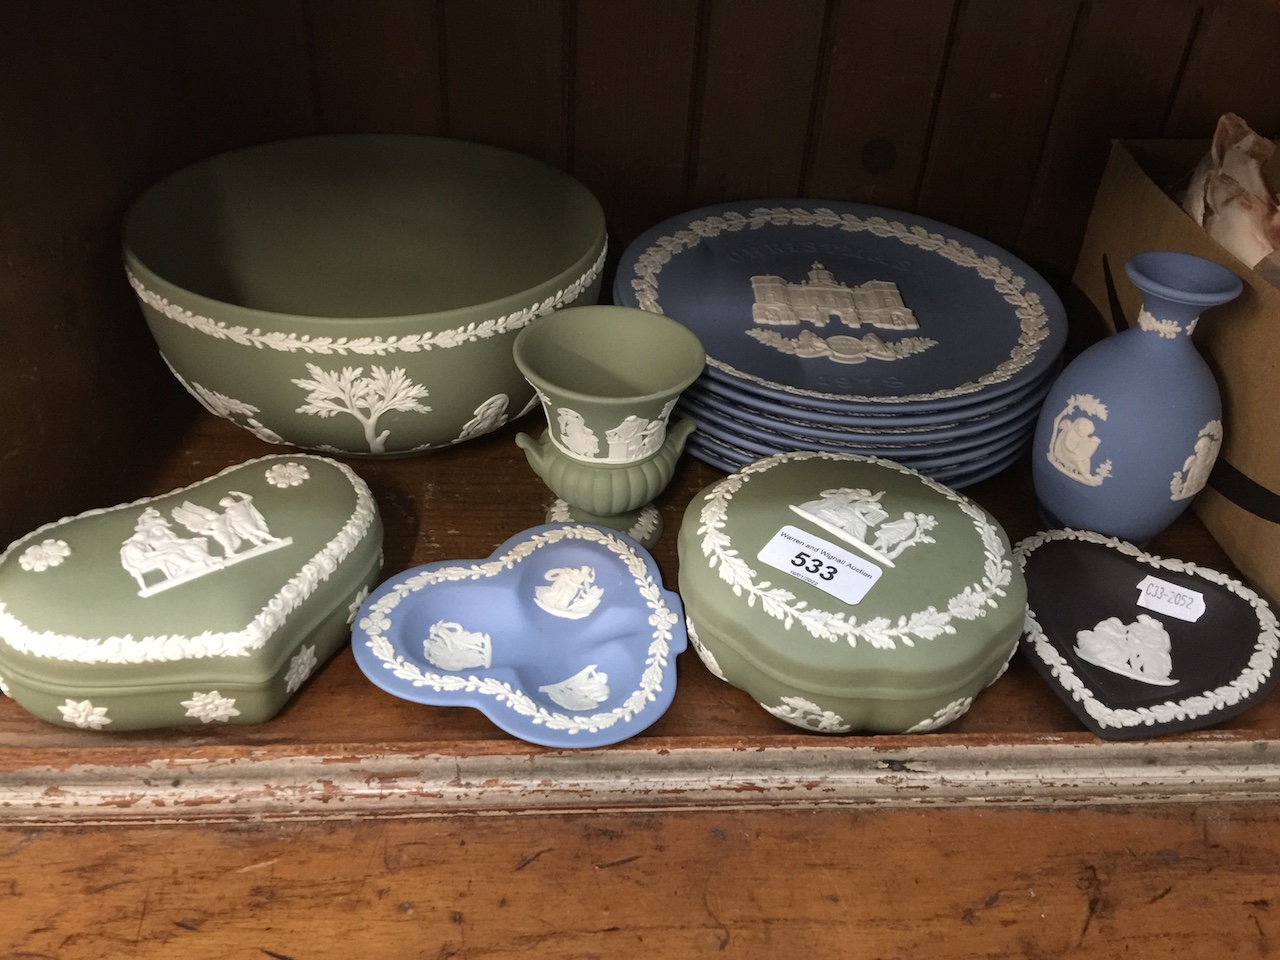 Wedgwood jasper wares including Christmas plates 1972-78 and a large green bowl approx 20cm diameter